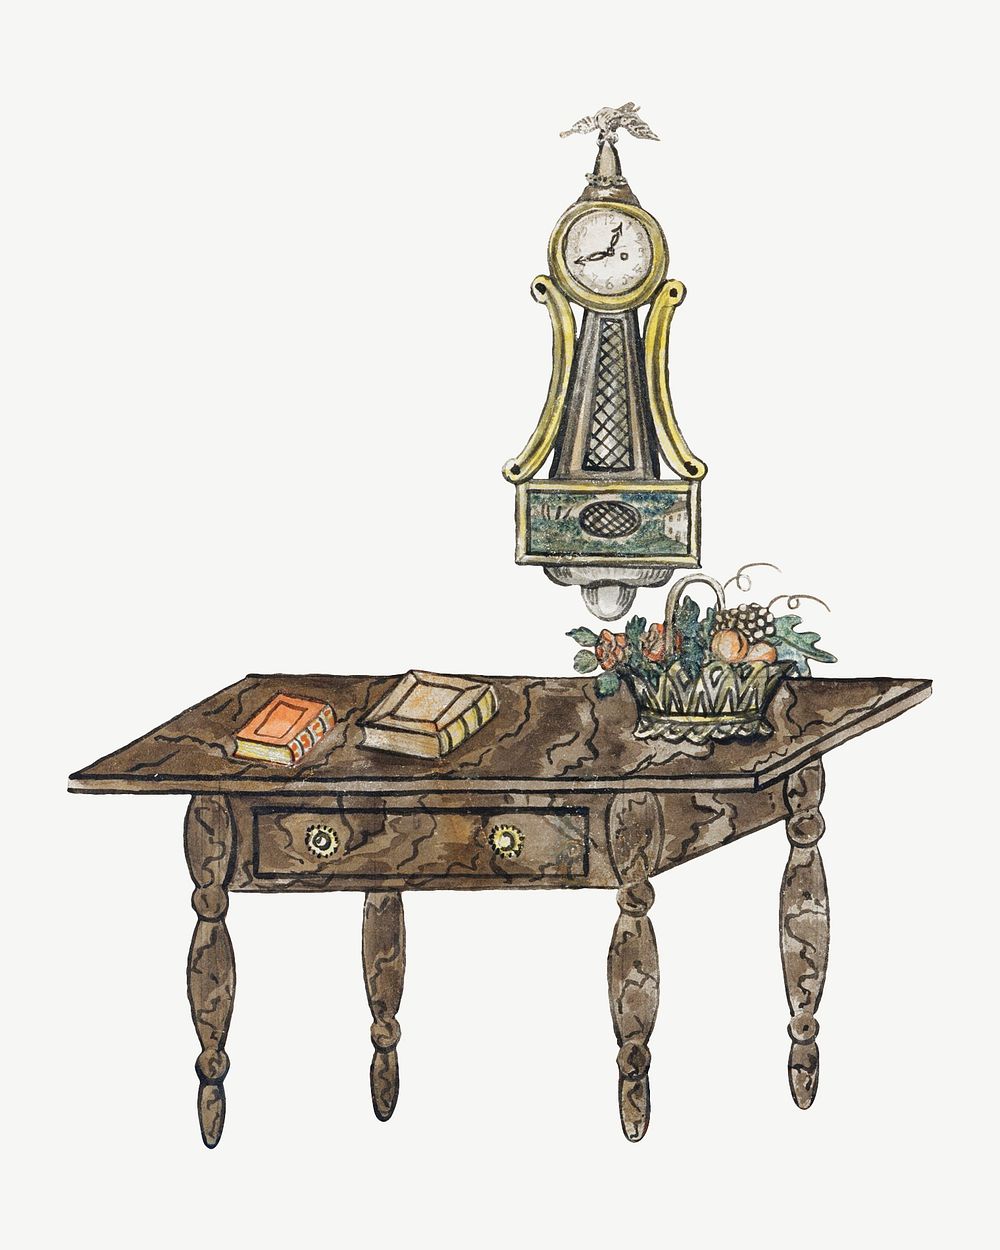 Victorian reading table, vintage illustration by Joseph H. Davis psd. Remixed by rawpixel.